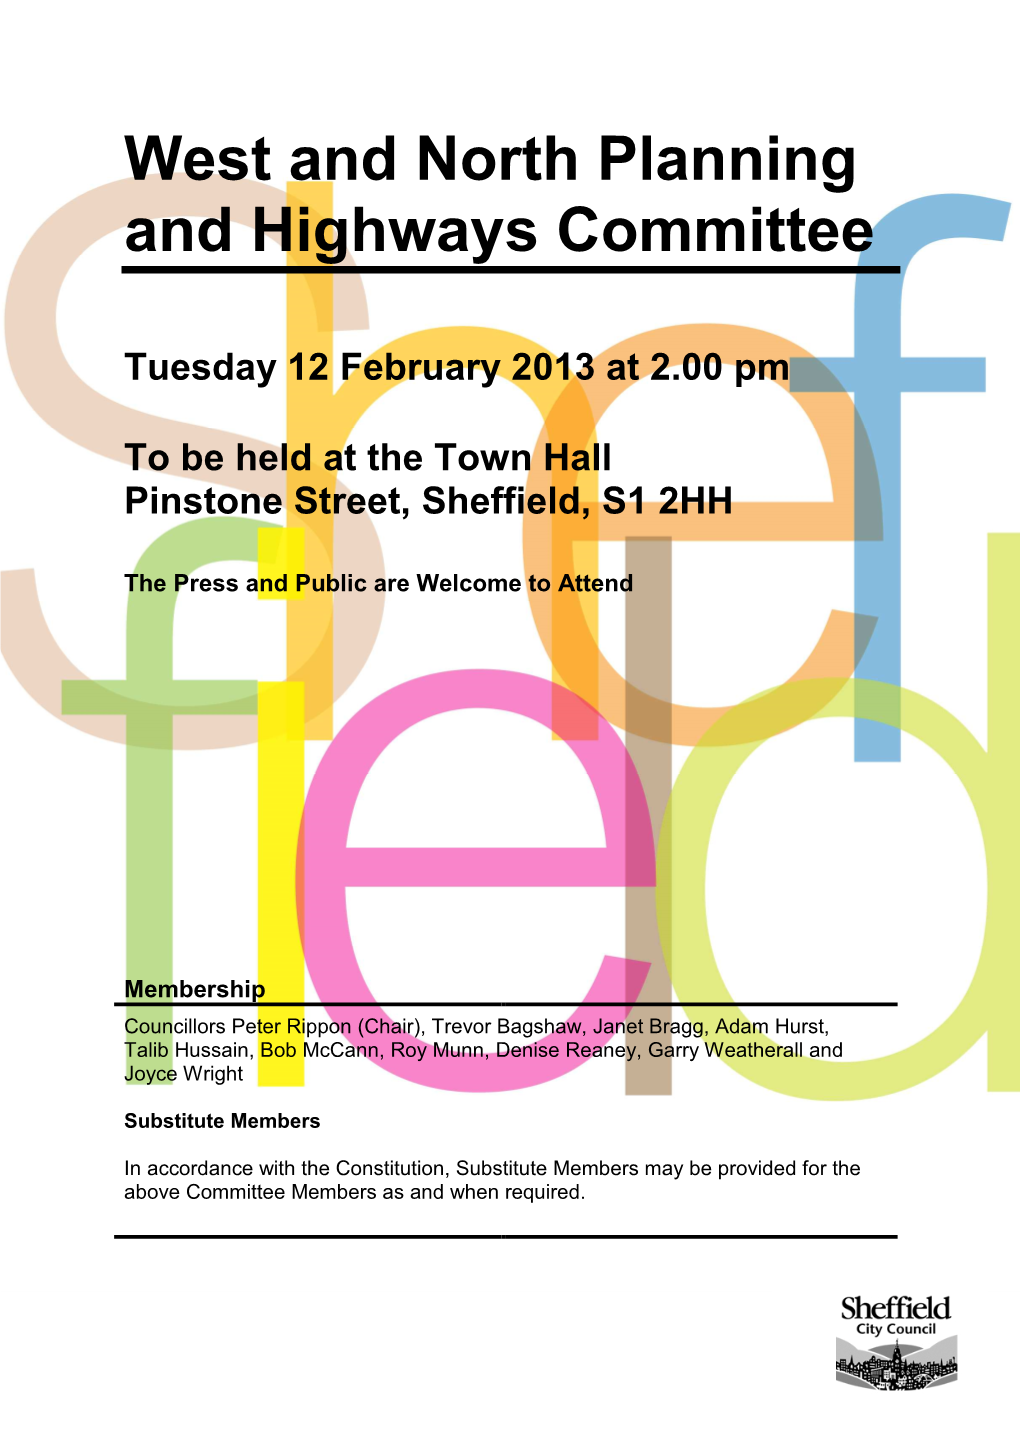 West and North Planning and Highways Committee